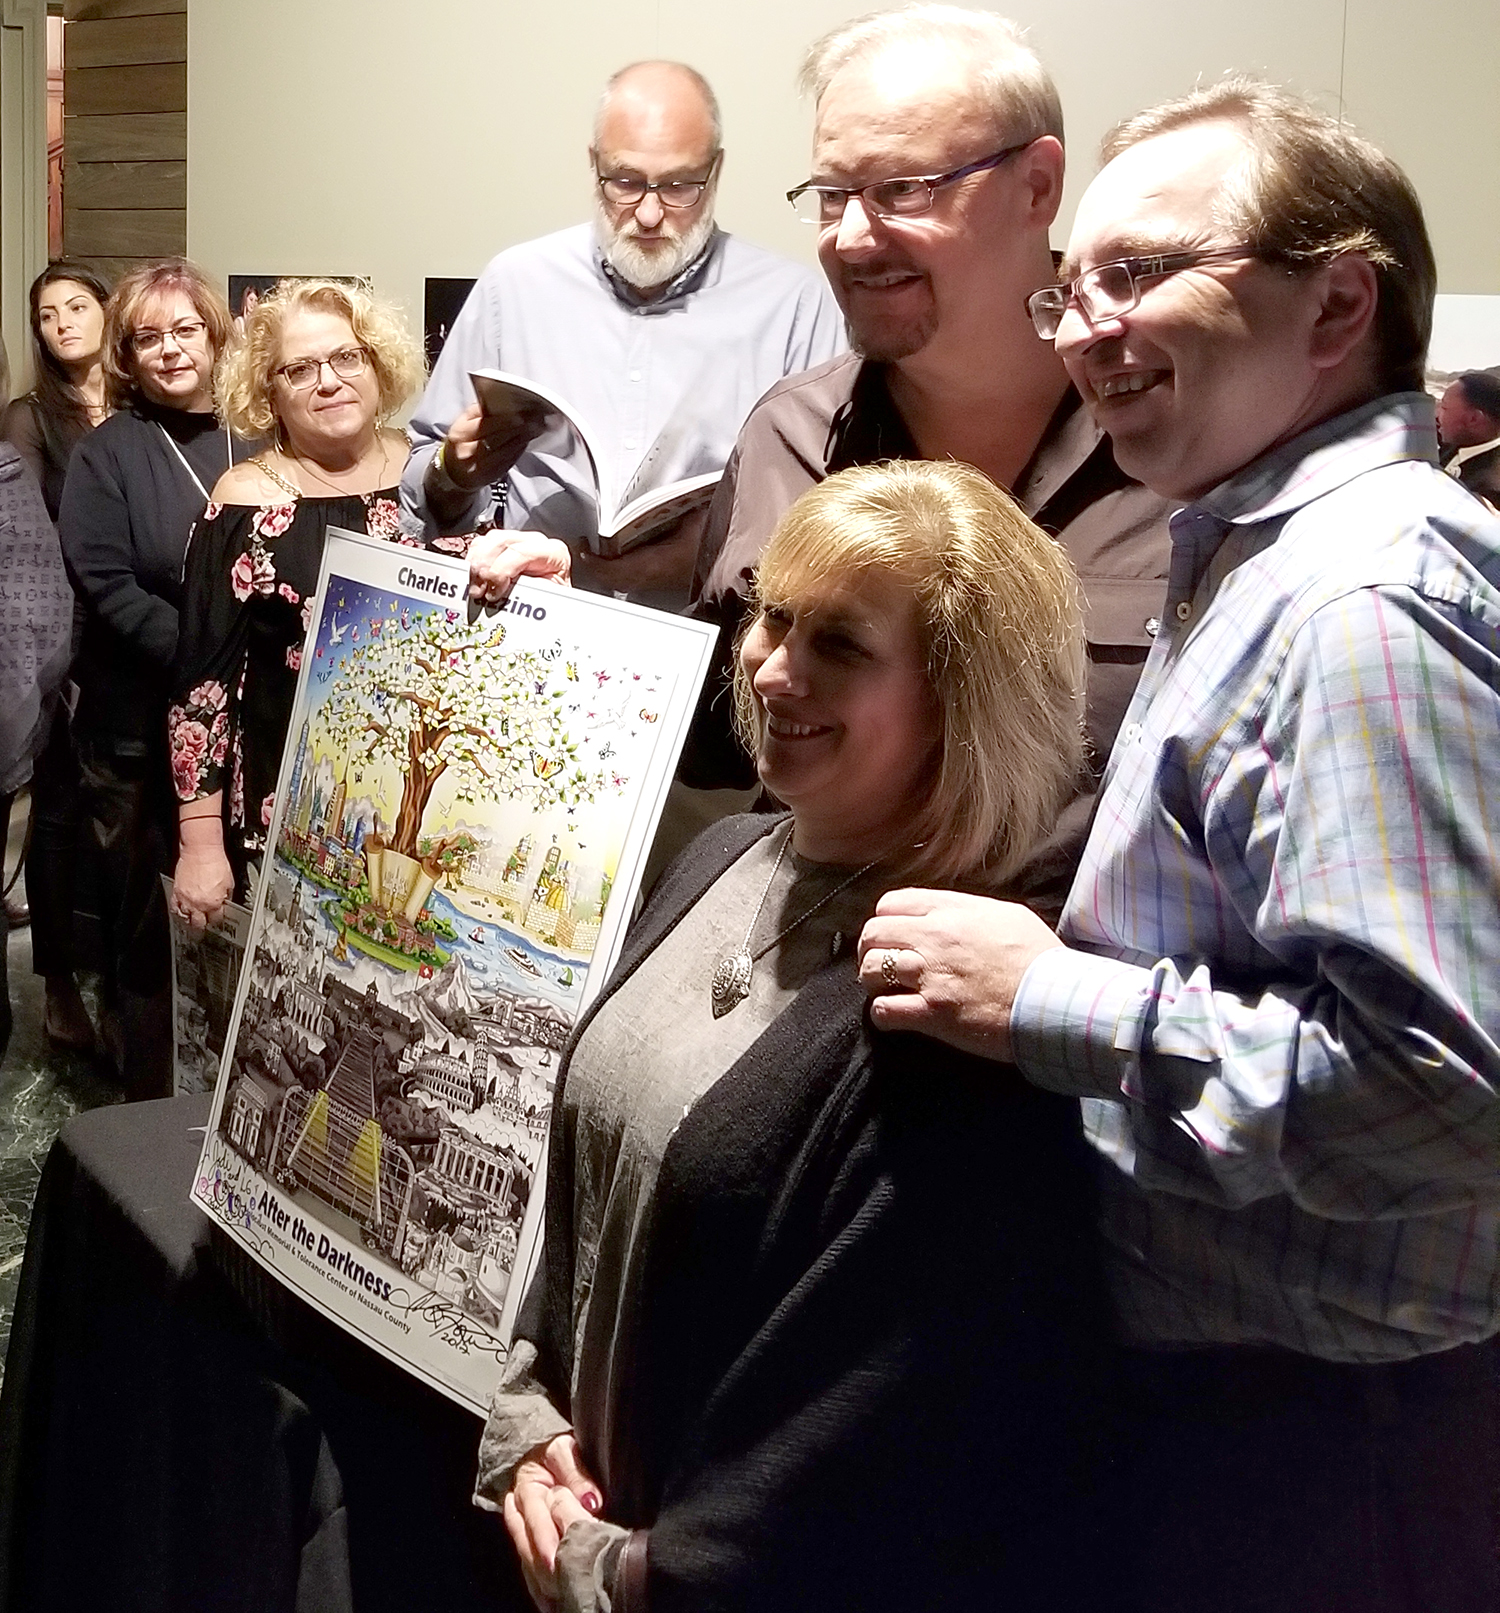 Charles Fazzino and friends gathered to take a photo with a "After the Darkness" signed pop art print